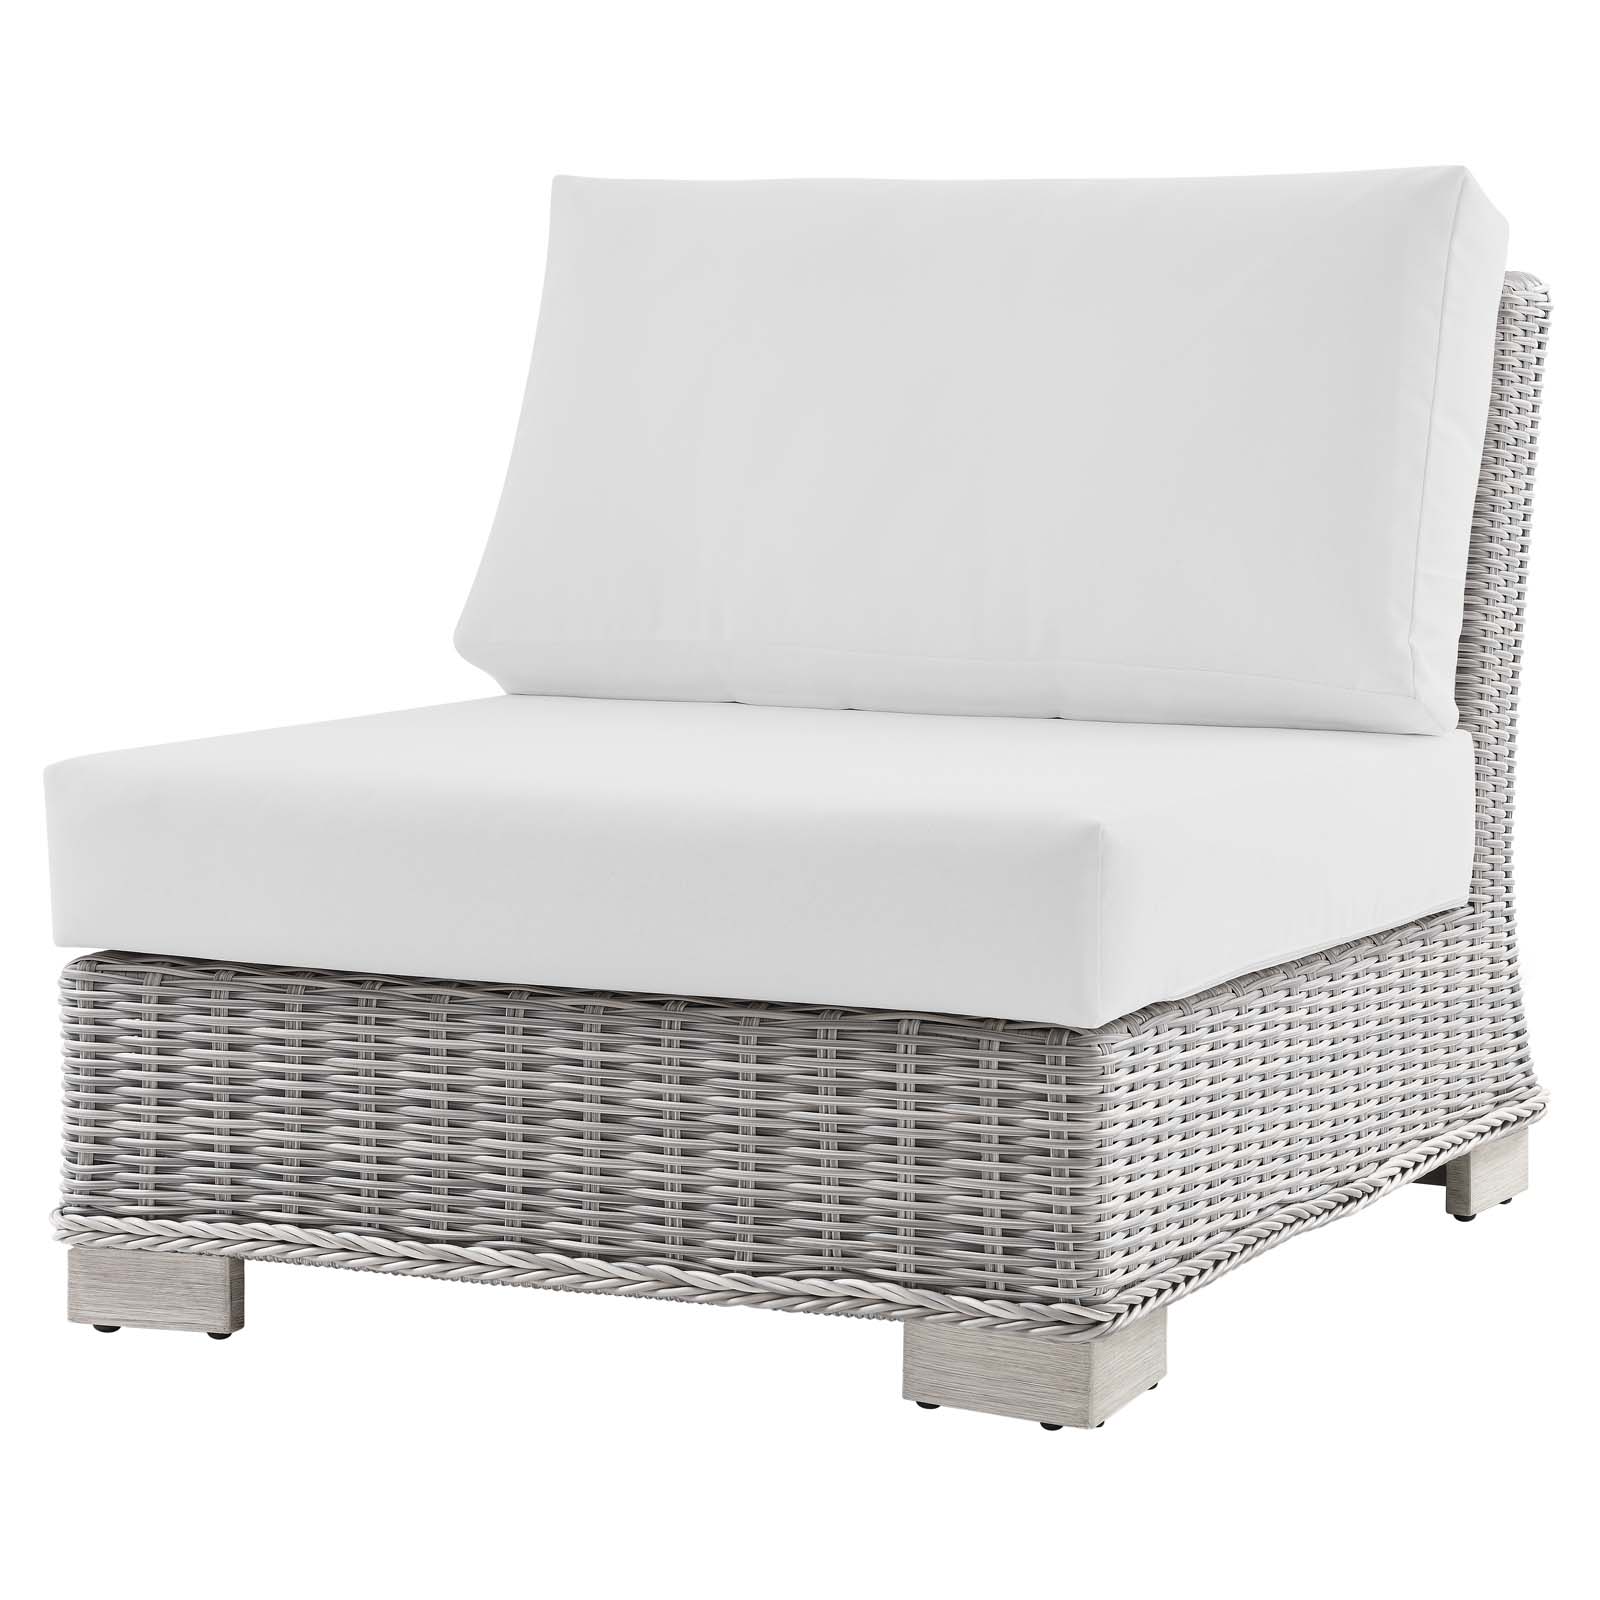 Lounge Sectional Sofa Chair Set, Rattan, Wicker, Light Grey Gray White, Modern Contemporary Urban Design, Outdoor Patio Balcony Cafe Bistro Garden Furniture Hotel Hospitality - image 3 of 10